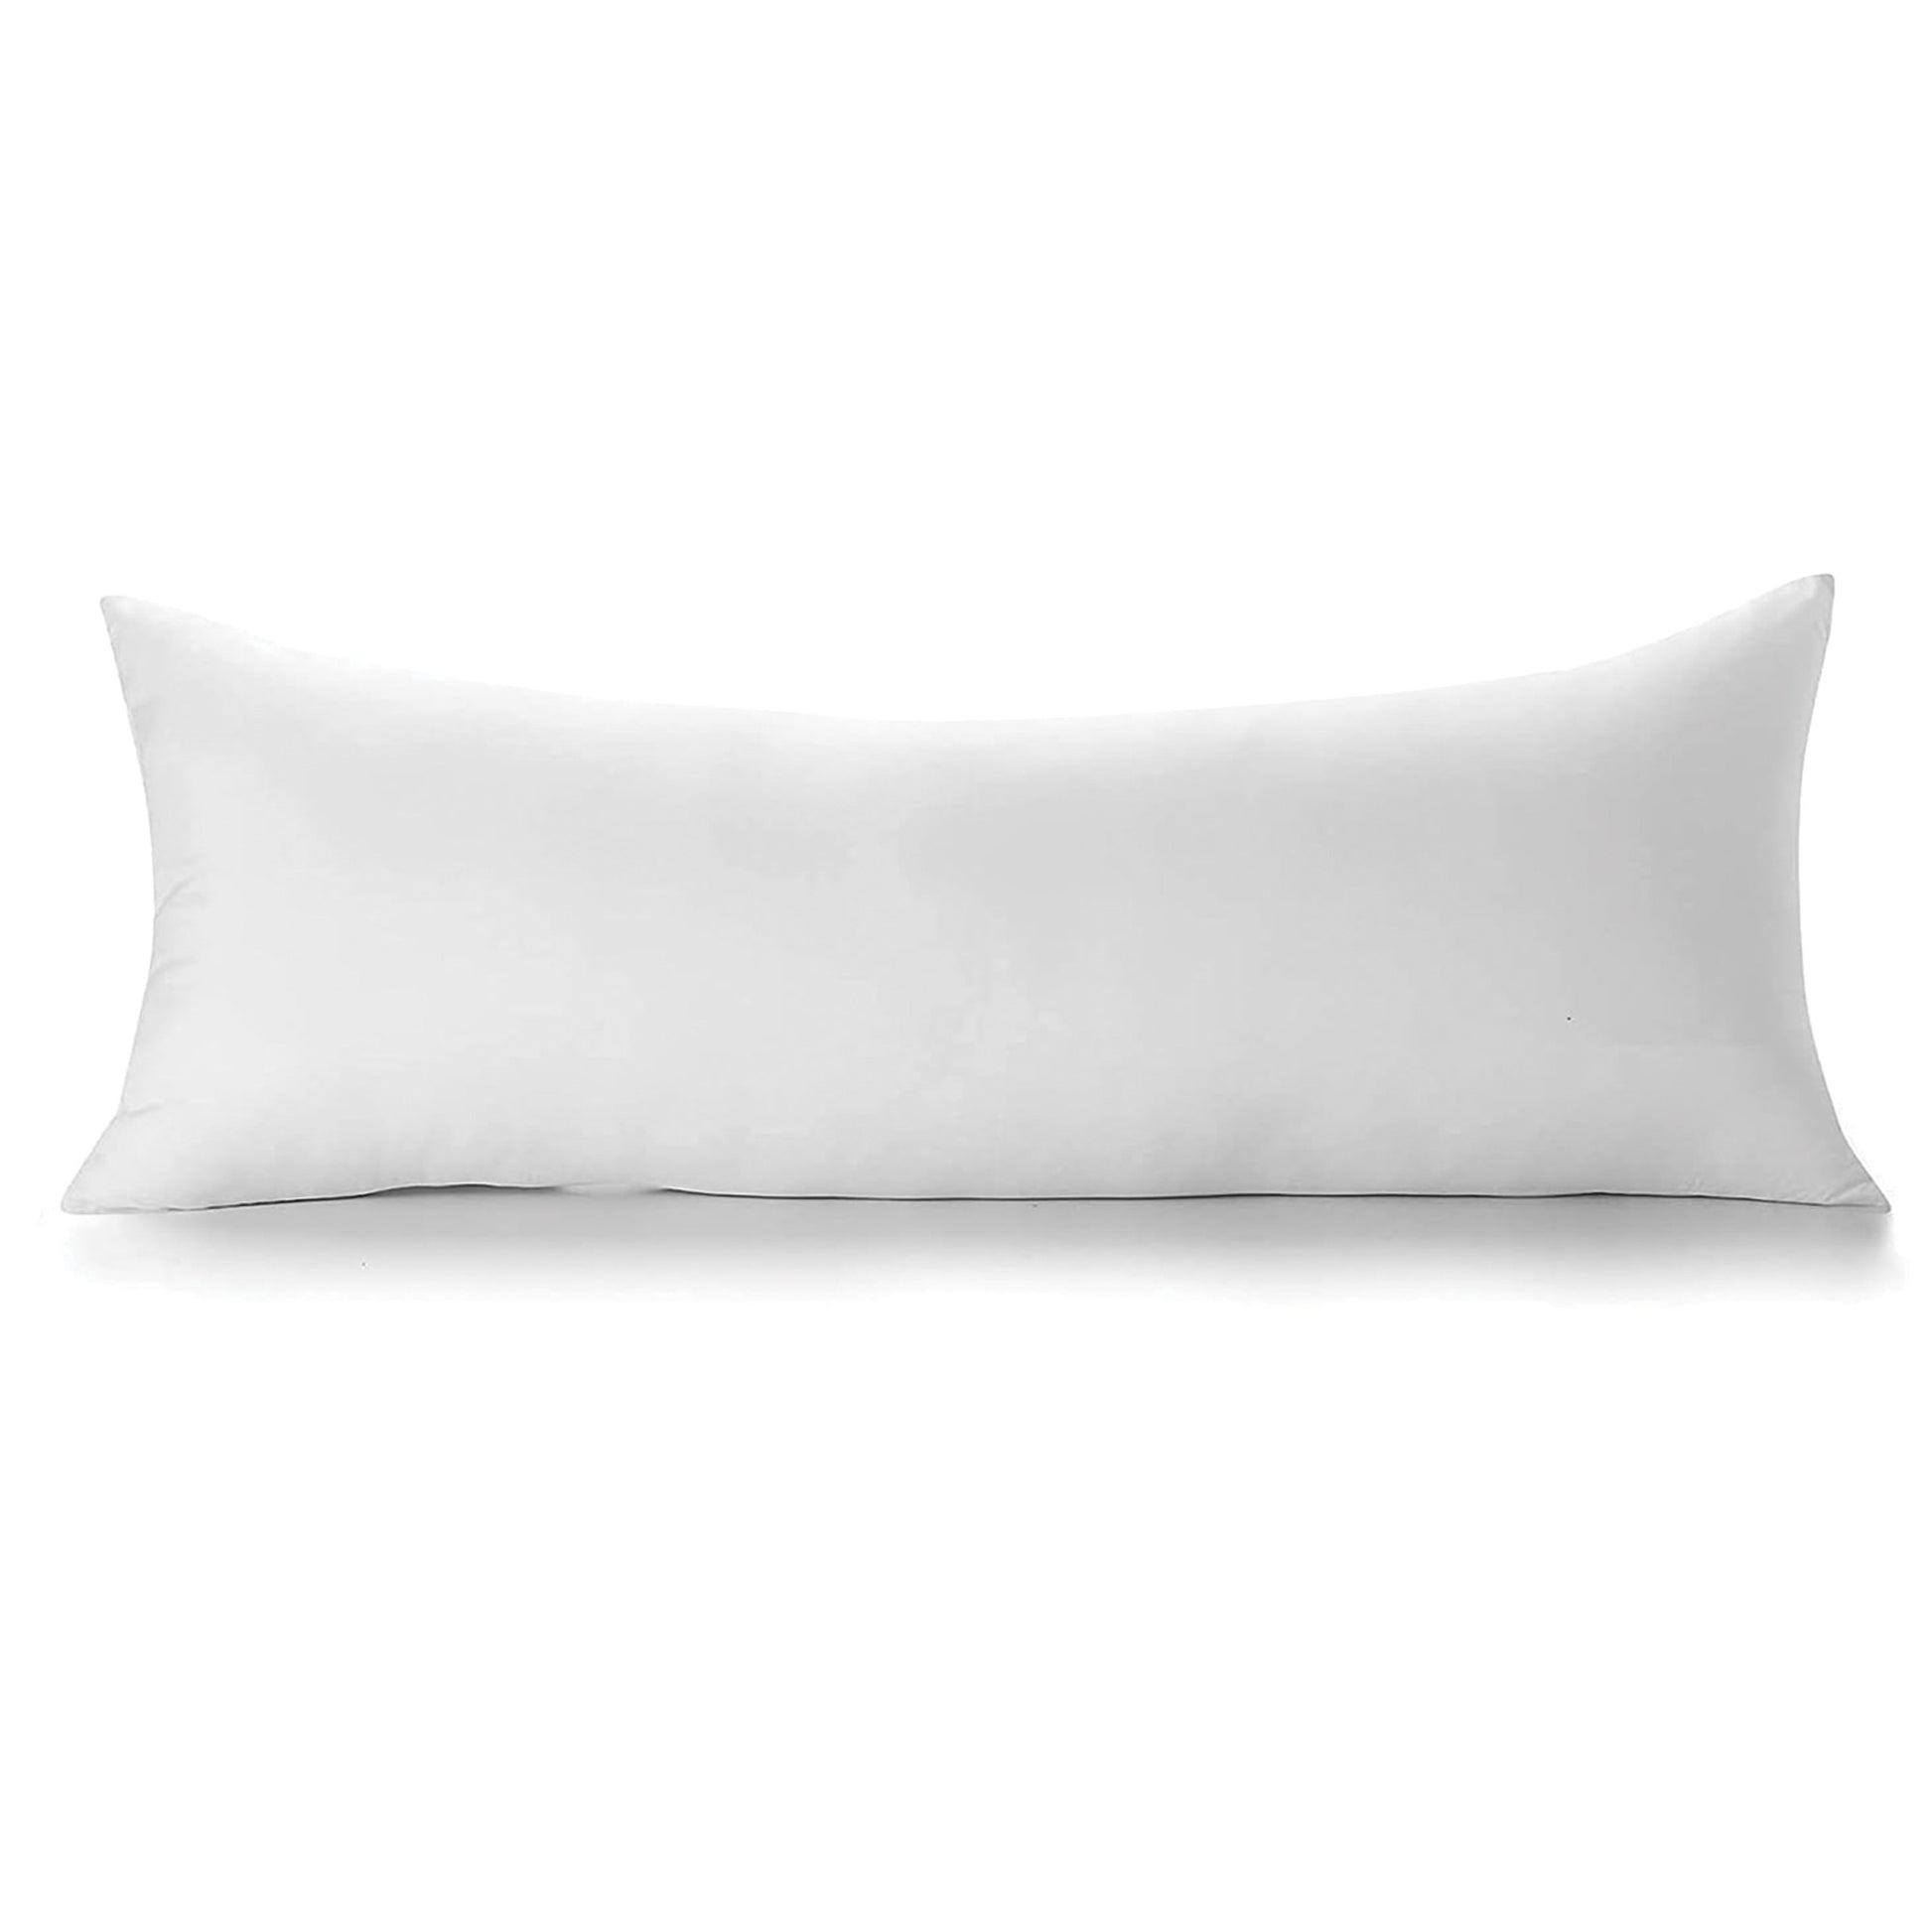 Embrace the ultimate in comfort with our premium body pillow, meticulously crafted with a perfect 50/50 blend of down and feathers. Sink into luxurious softness while enjoying optimal support for a restorative night's sleep